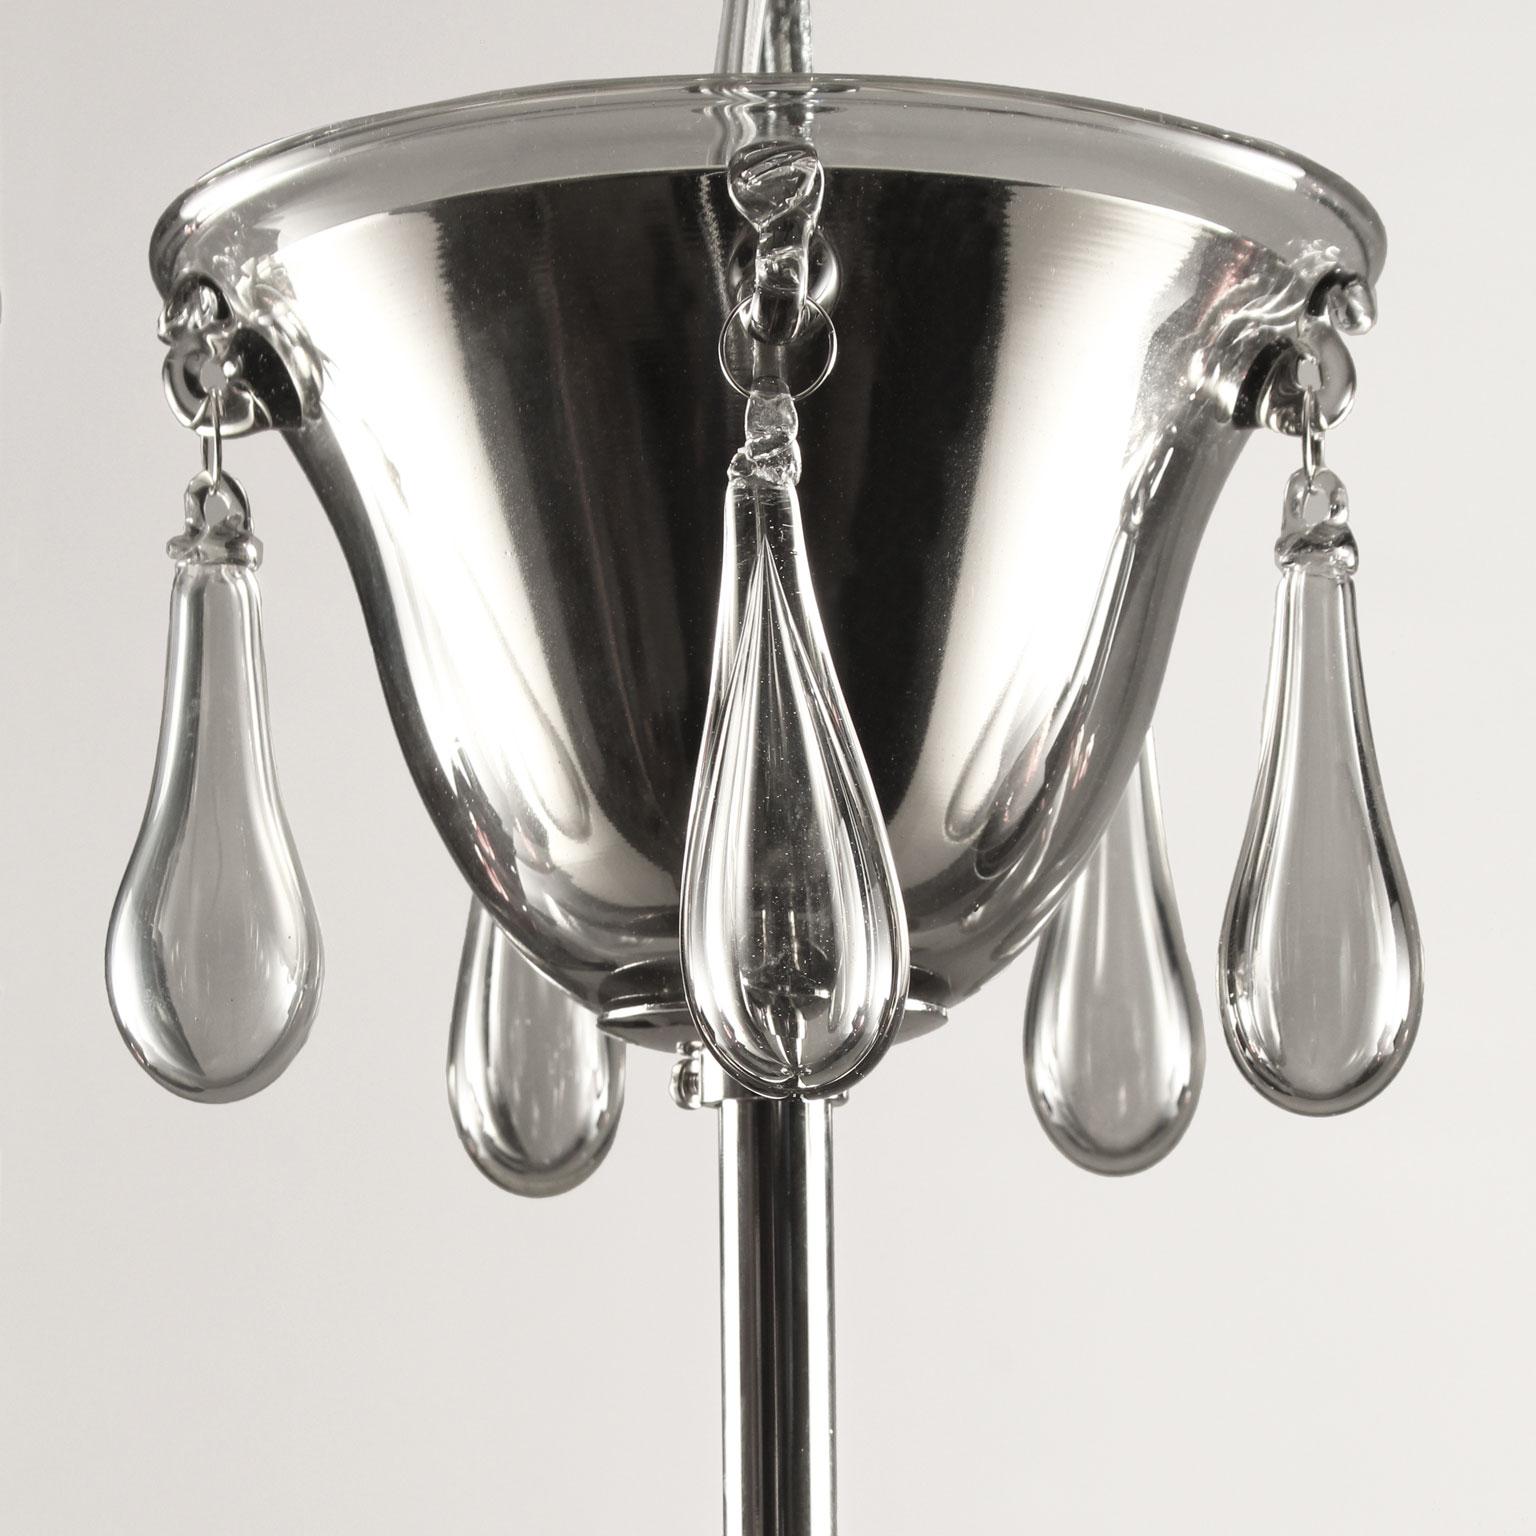 Artistic Suspension Lamp handblown in Grey Murano Glass by Multiforme In New Condition For Sale In Trebaseleghe, IT